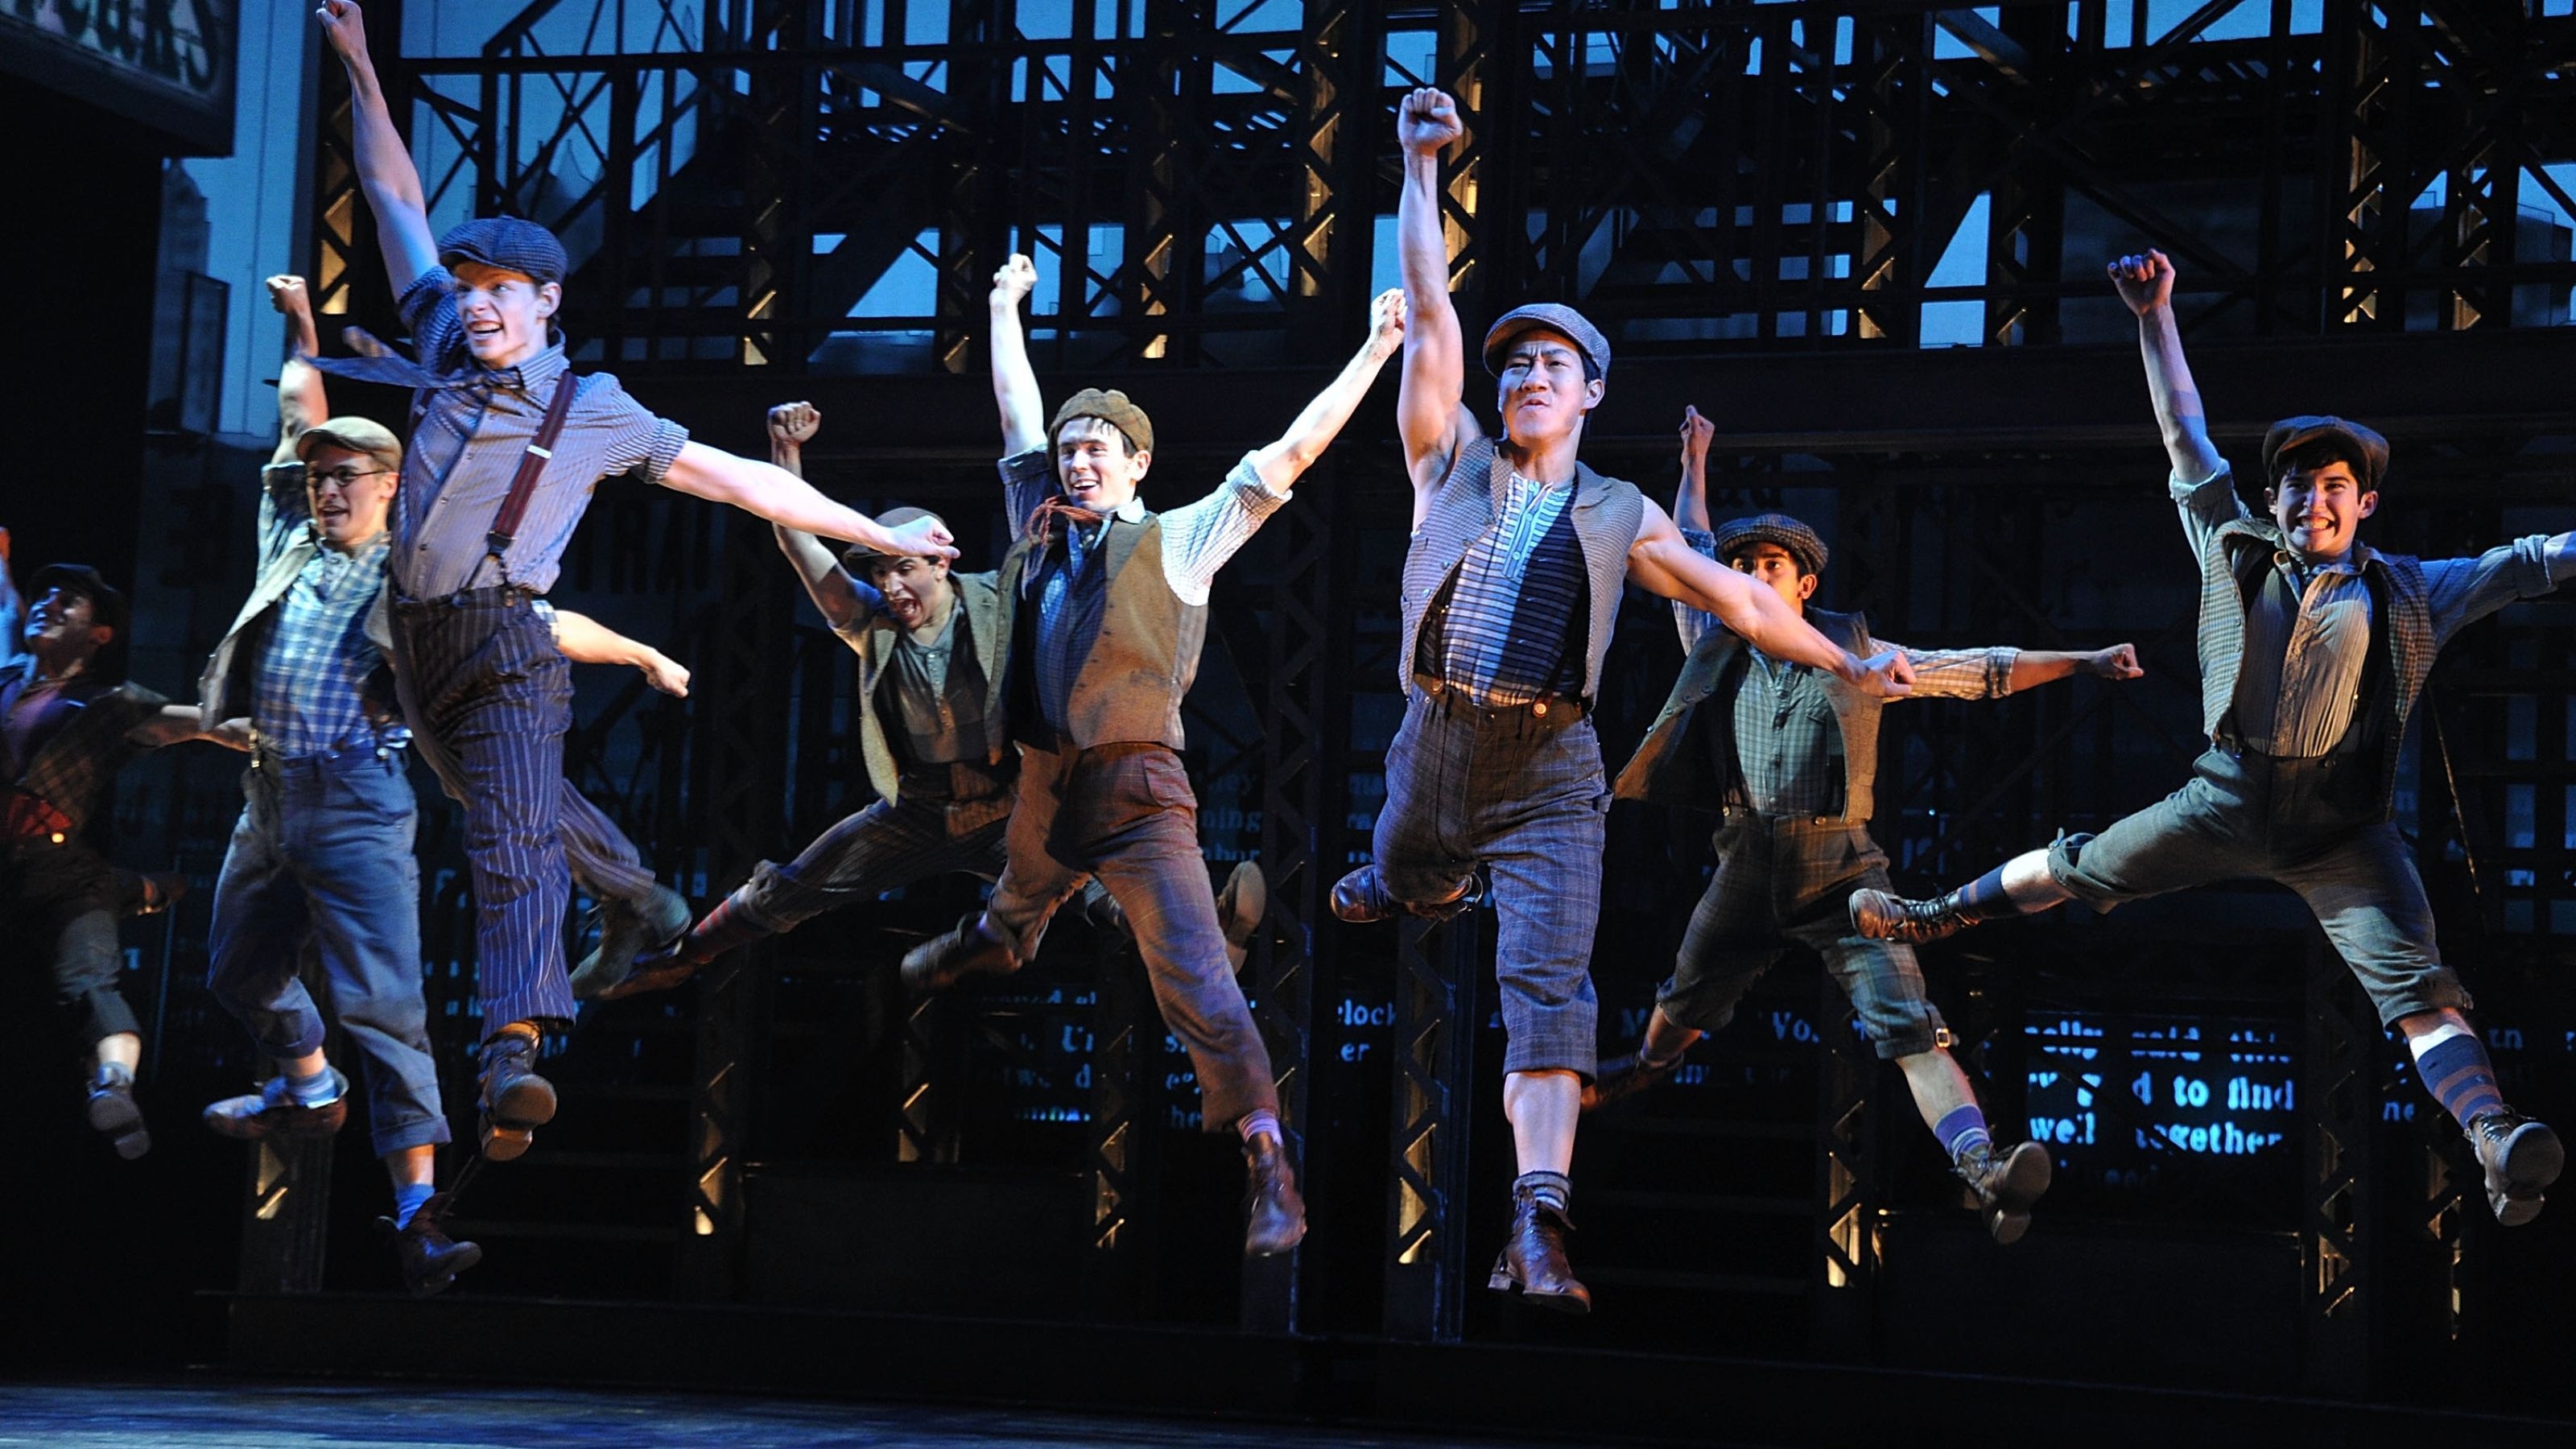 2020 other images newsies Broadway wallpaper, Broadway wallpapers, Hamilton Broadway wallpaper, 3200x1800 HD Desktop